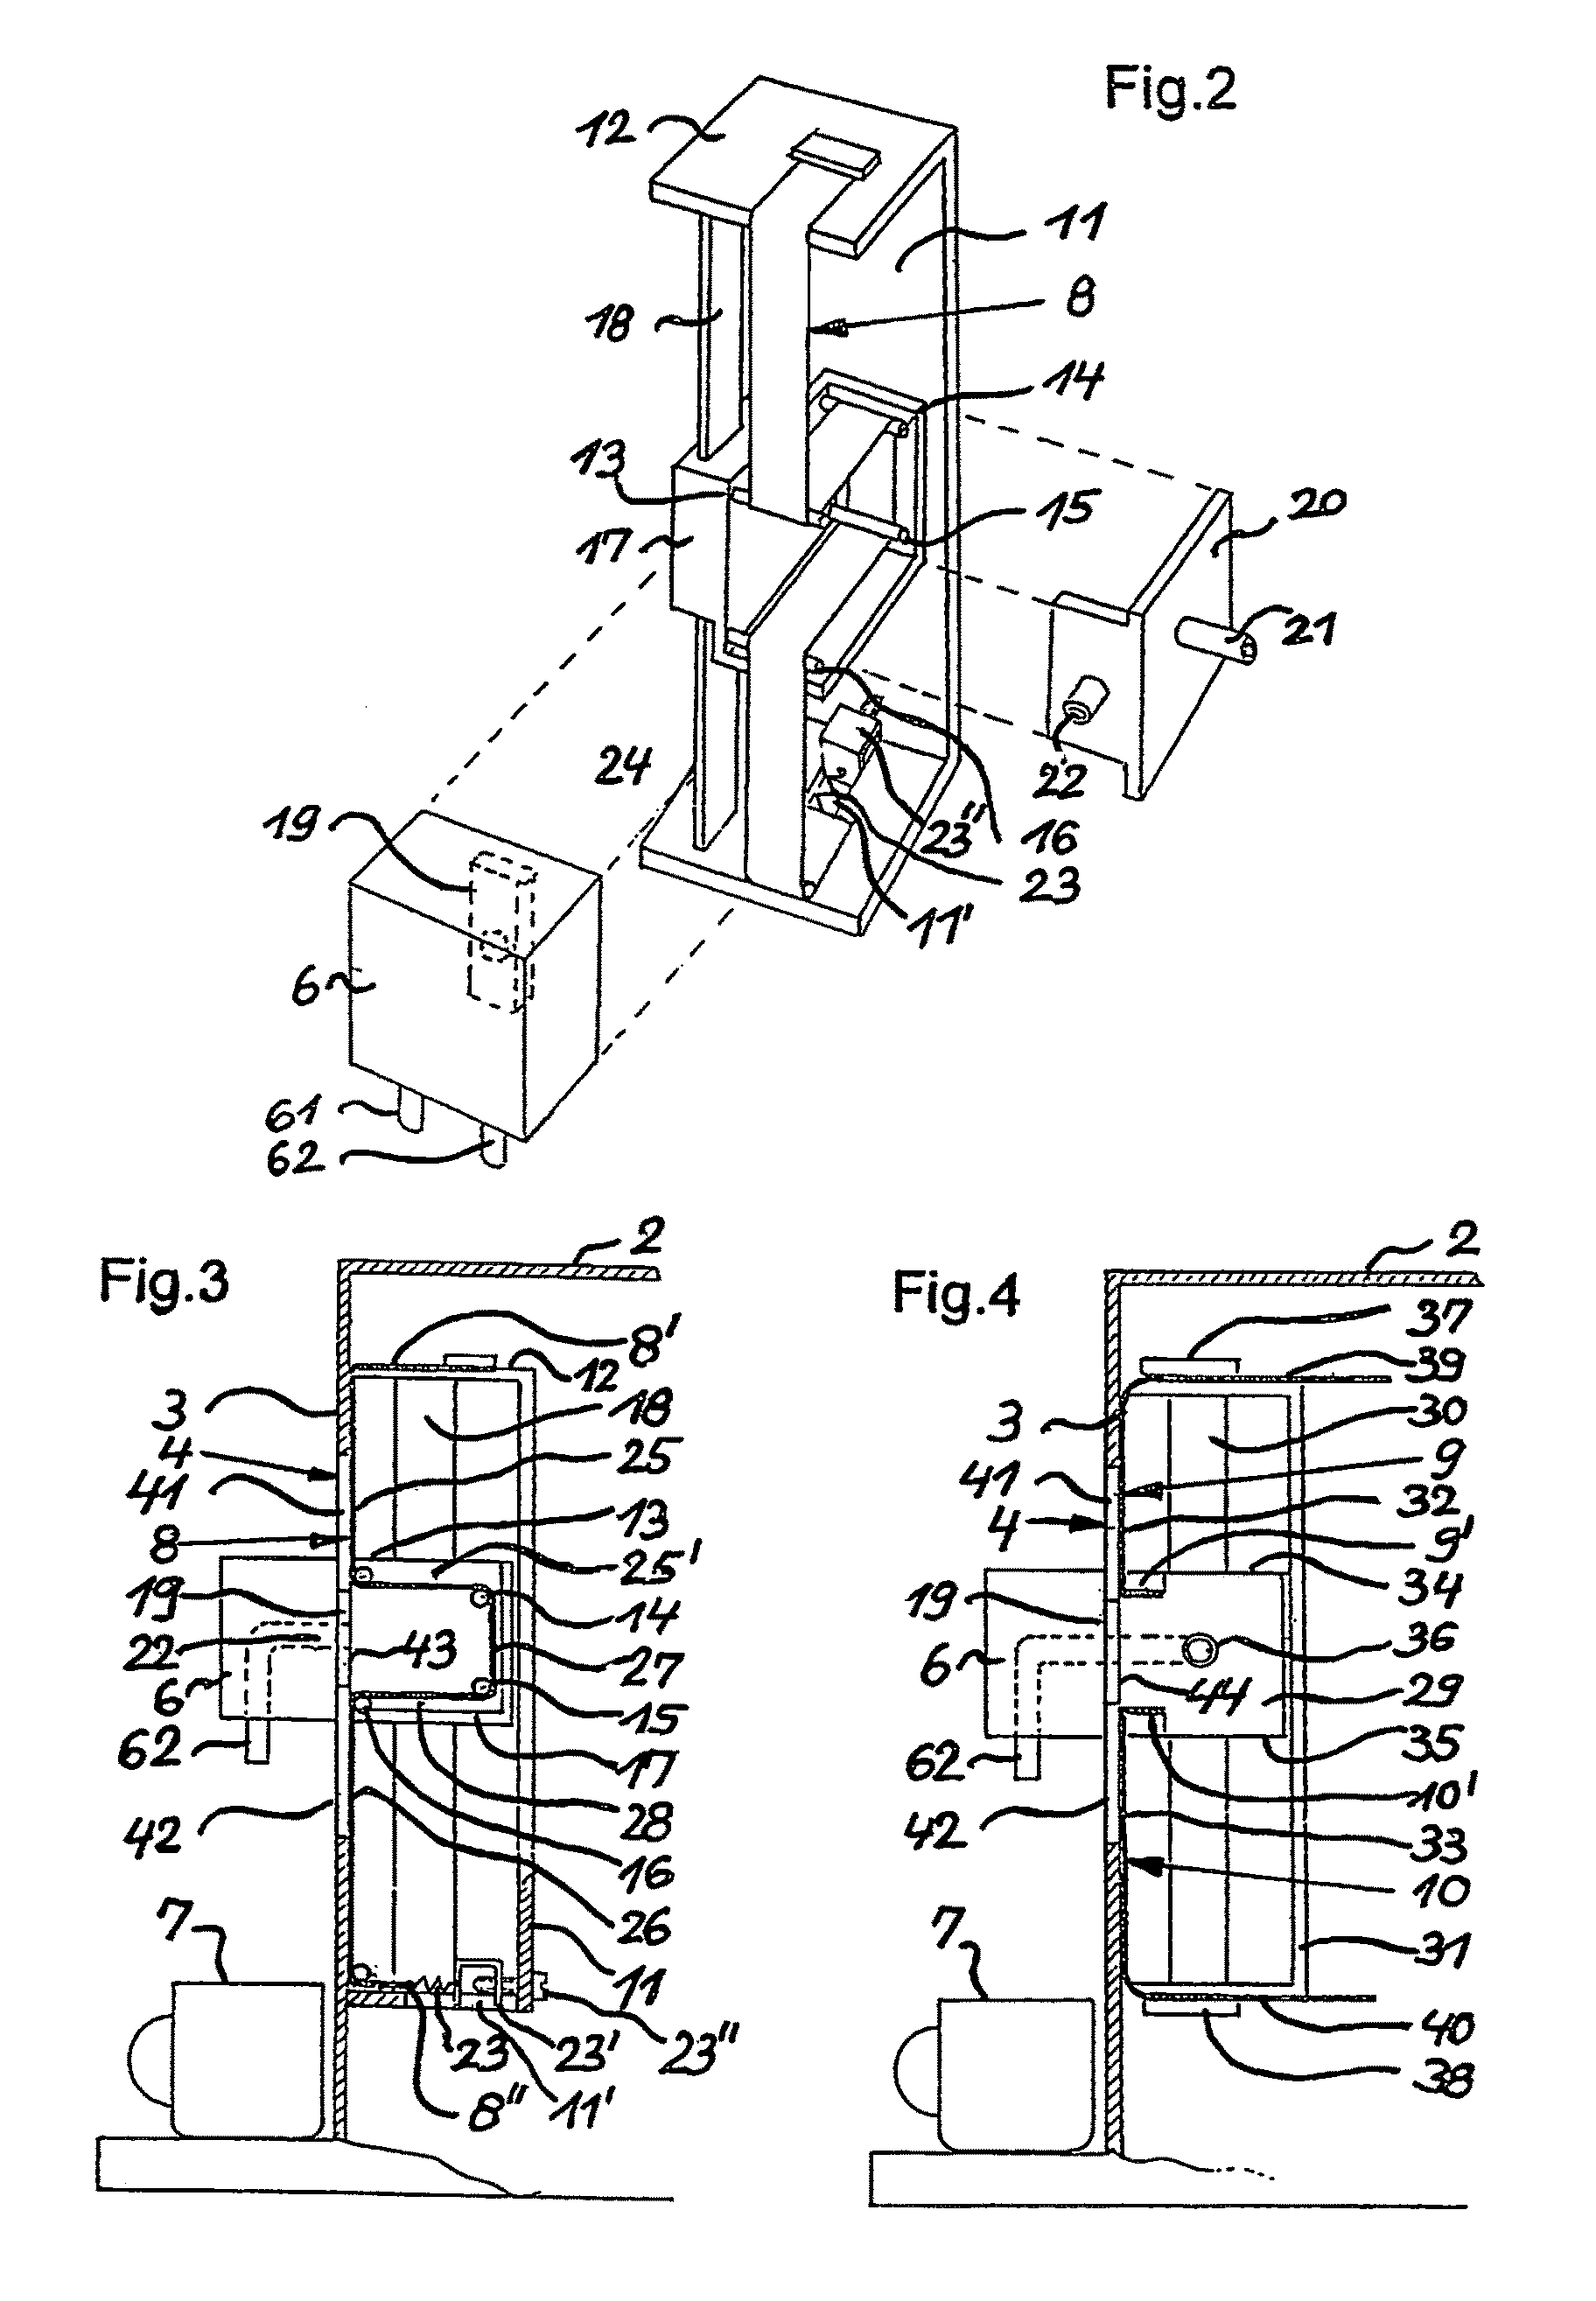 Drink preparation machine, particularly espresso machine, comprising a height adjustable drink outflow unit